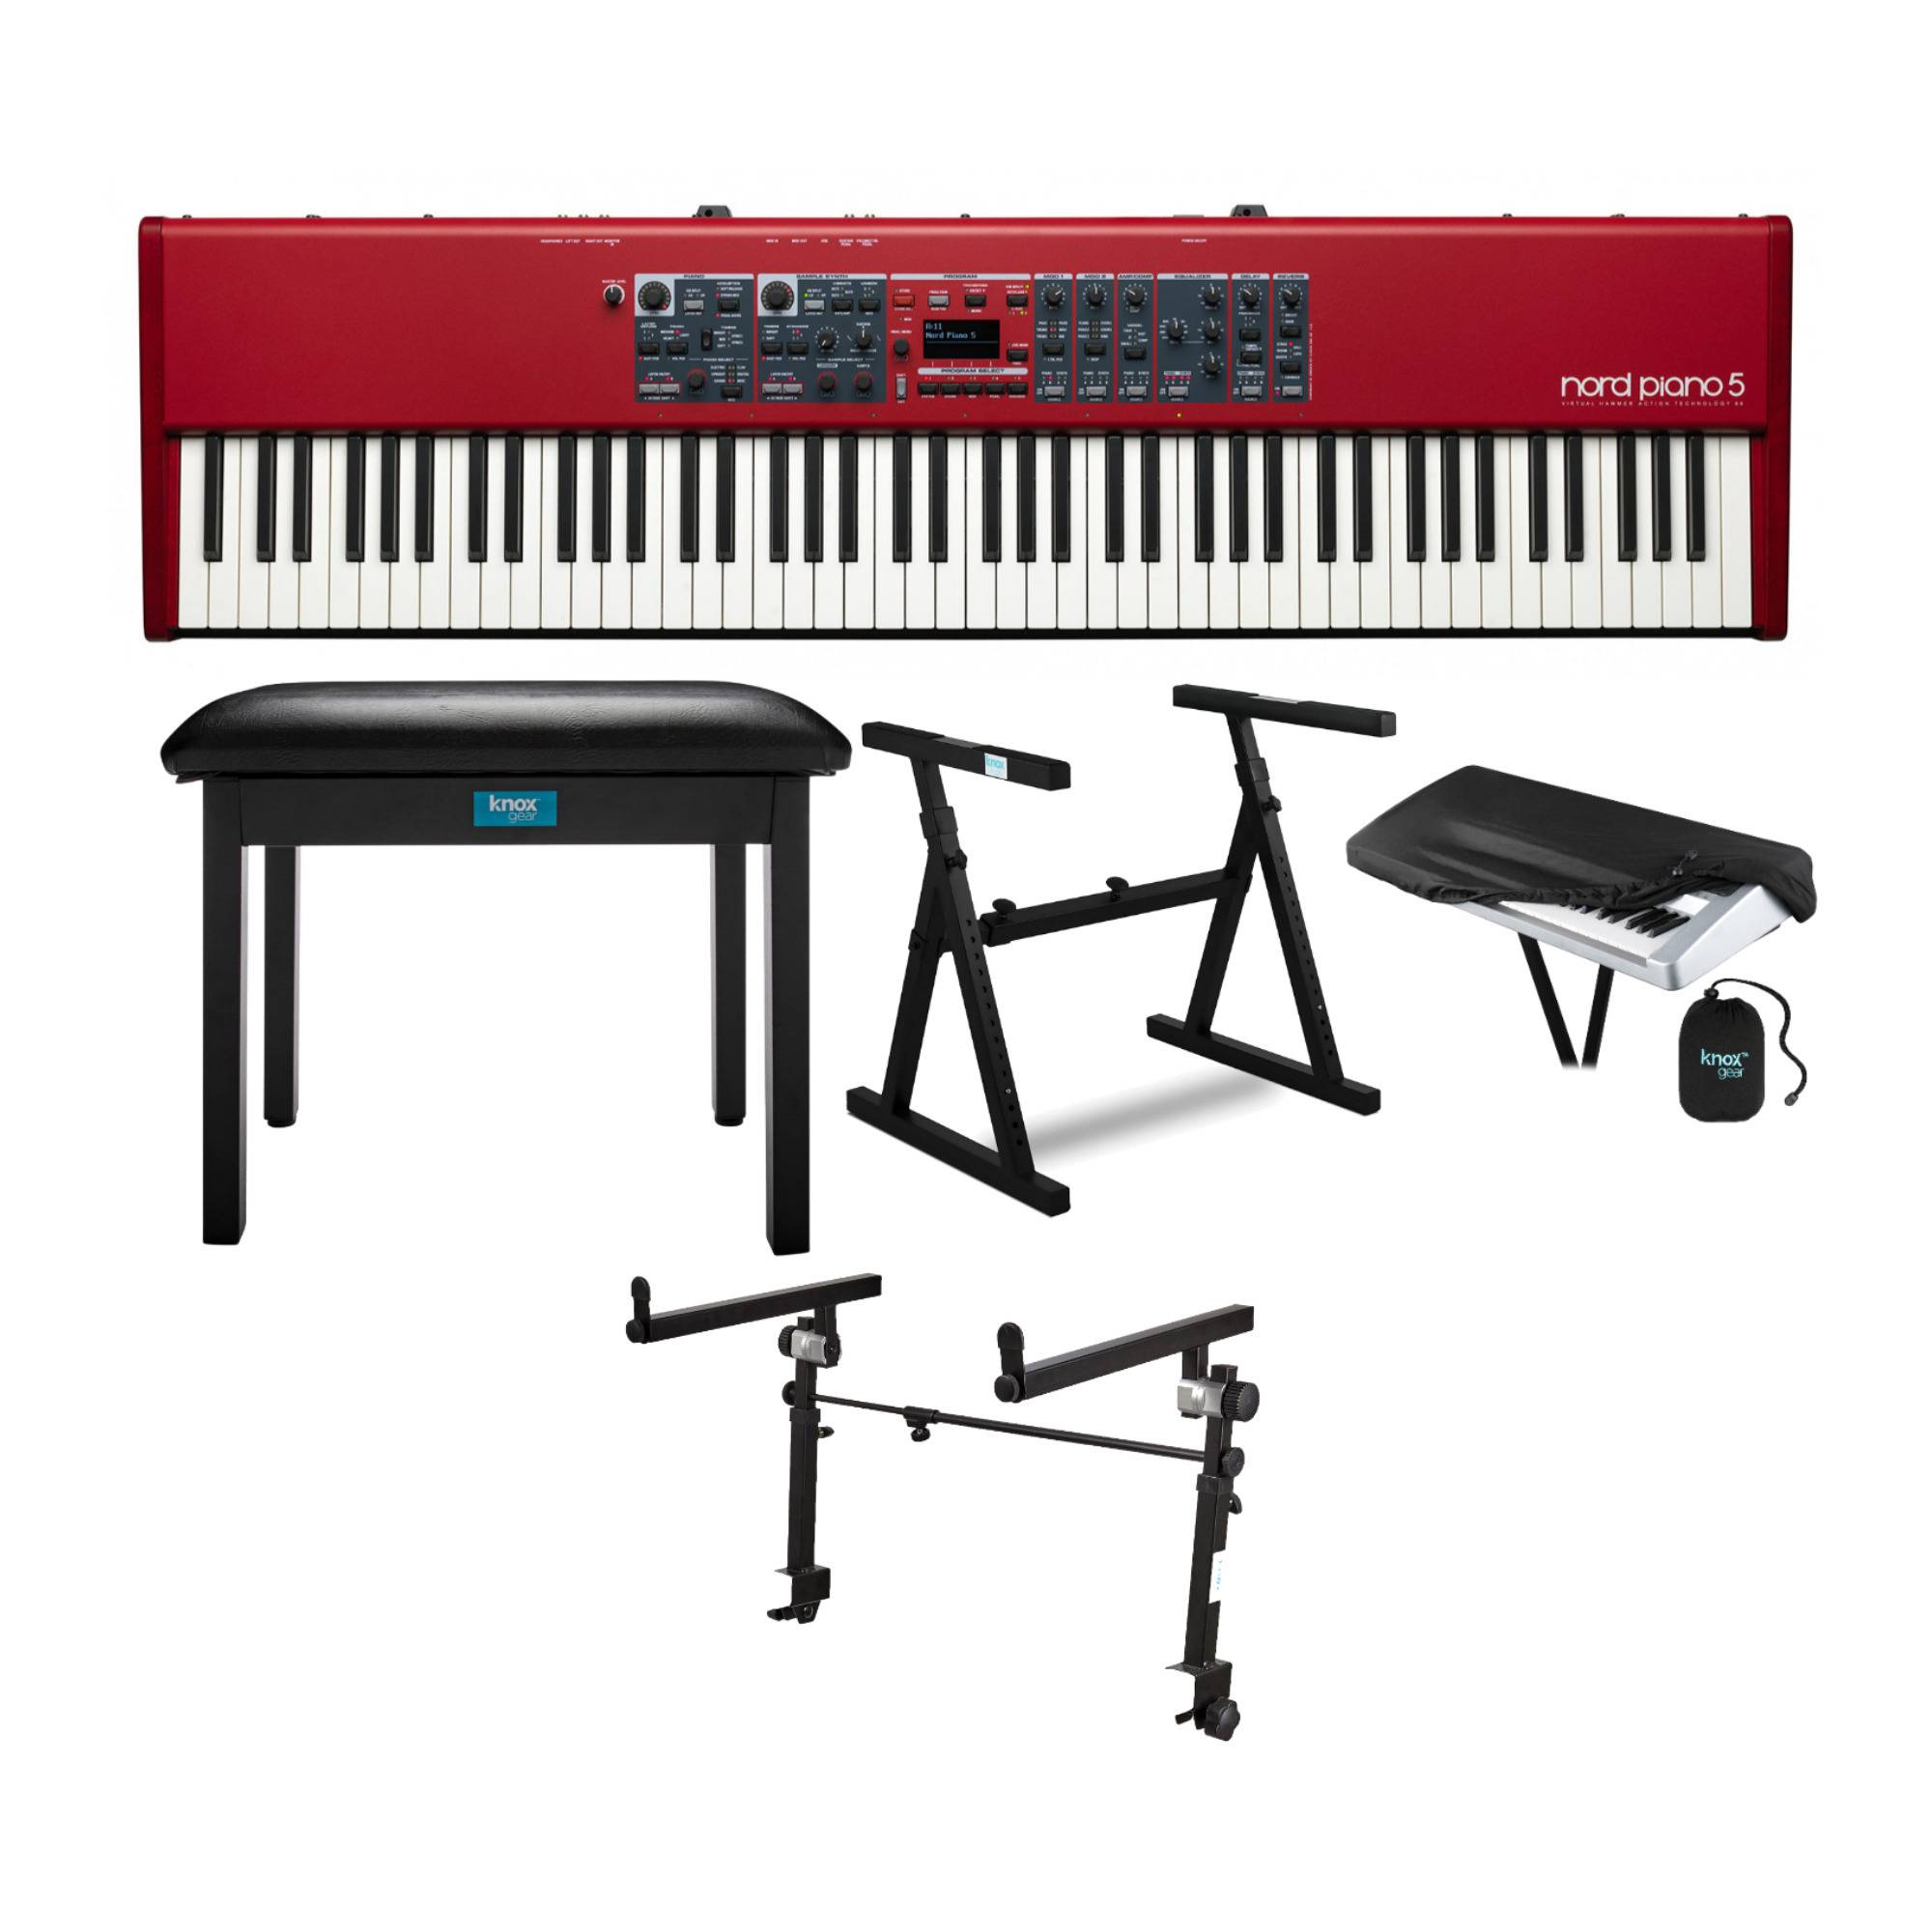 Nord Piano 5 88-Key Digital Piano with Bench, Keyboard Stand and Dust Cover Bundle